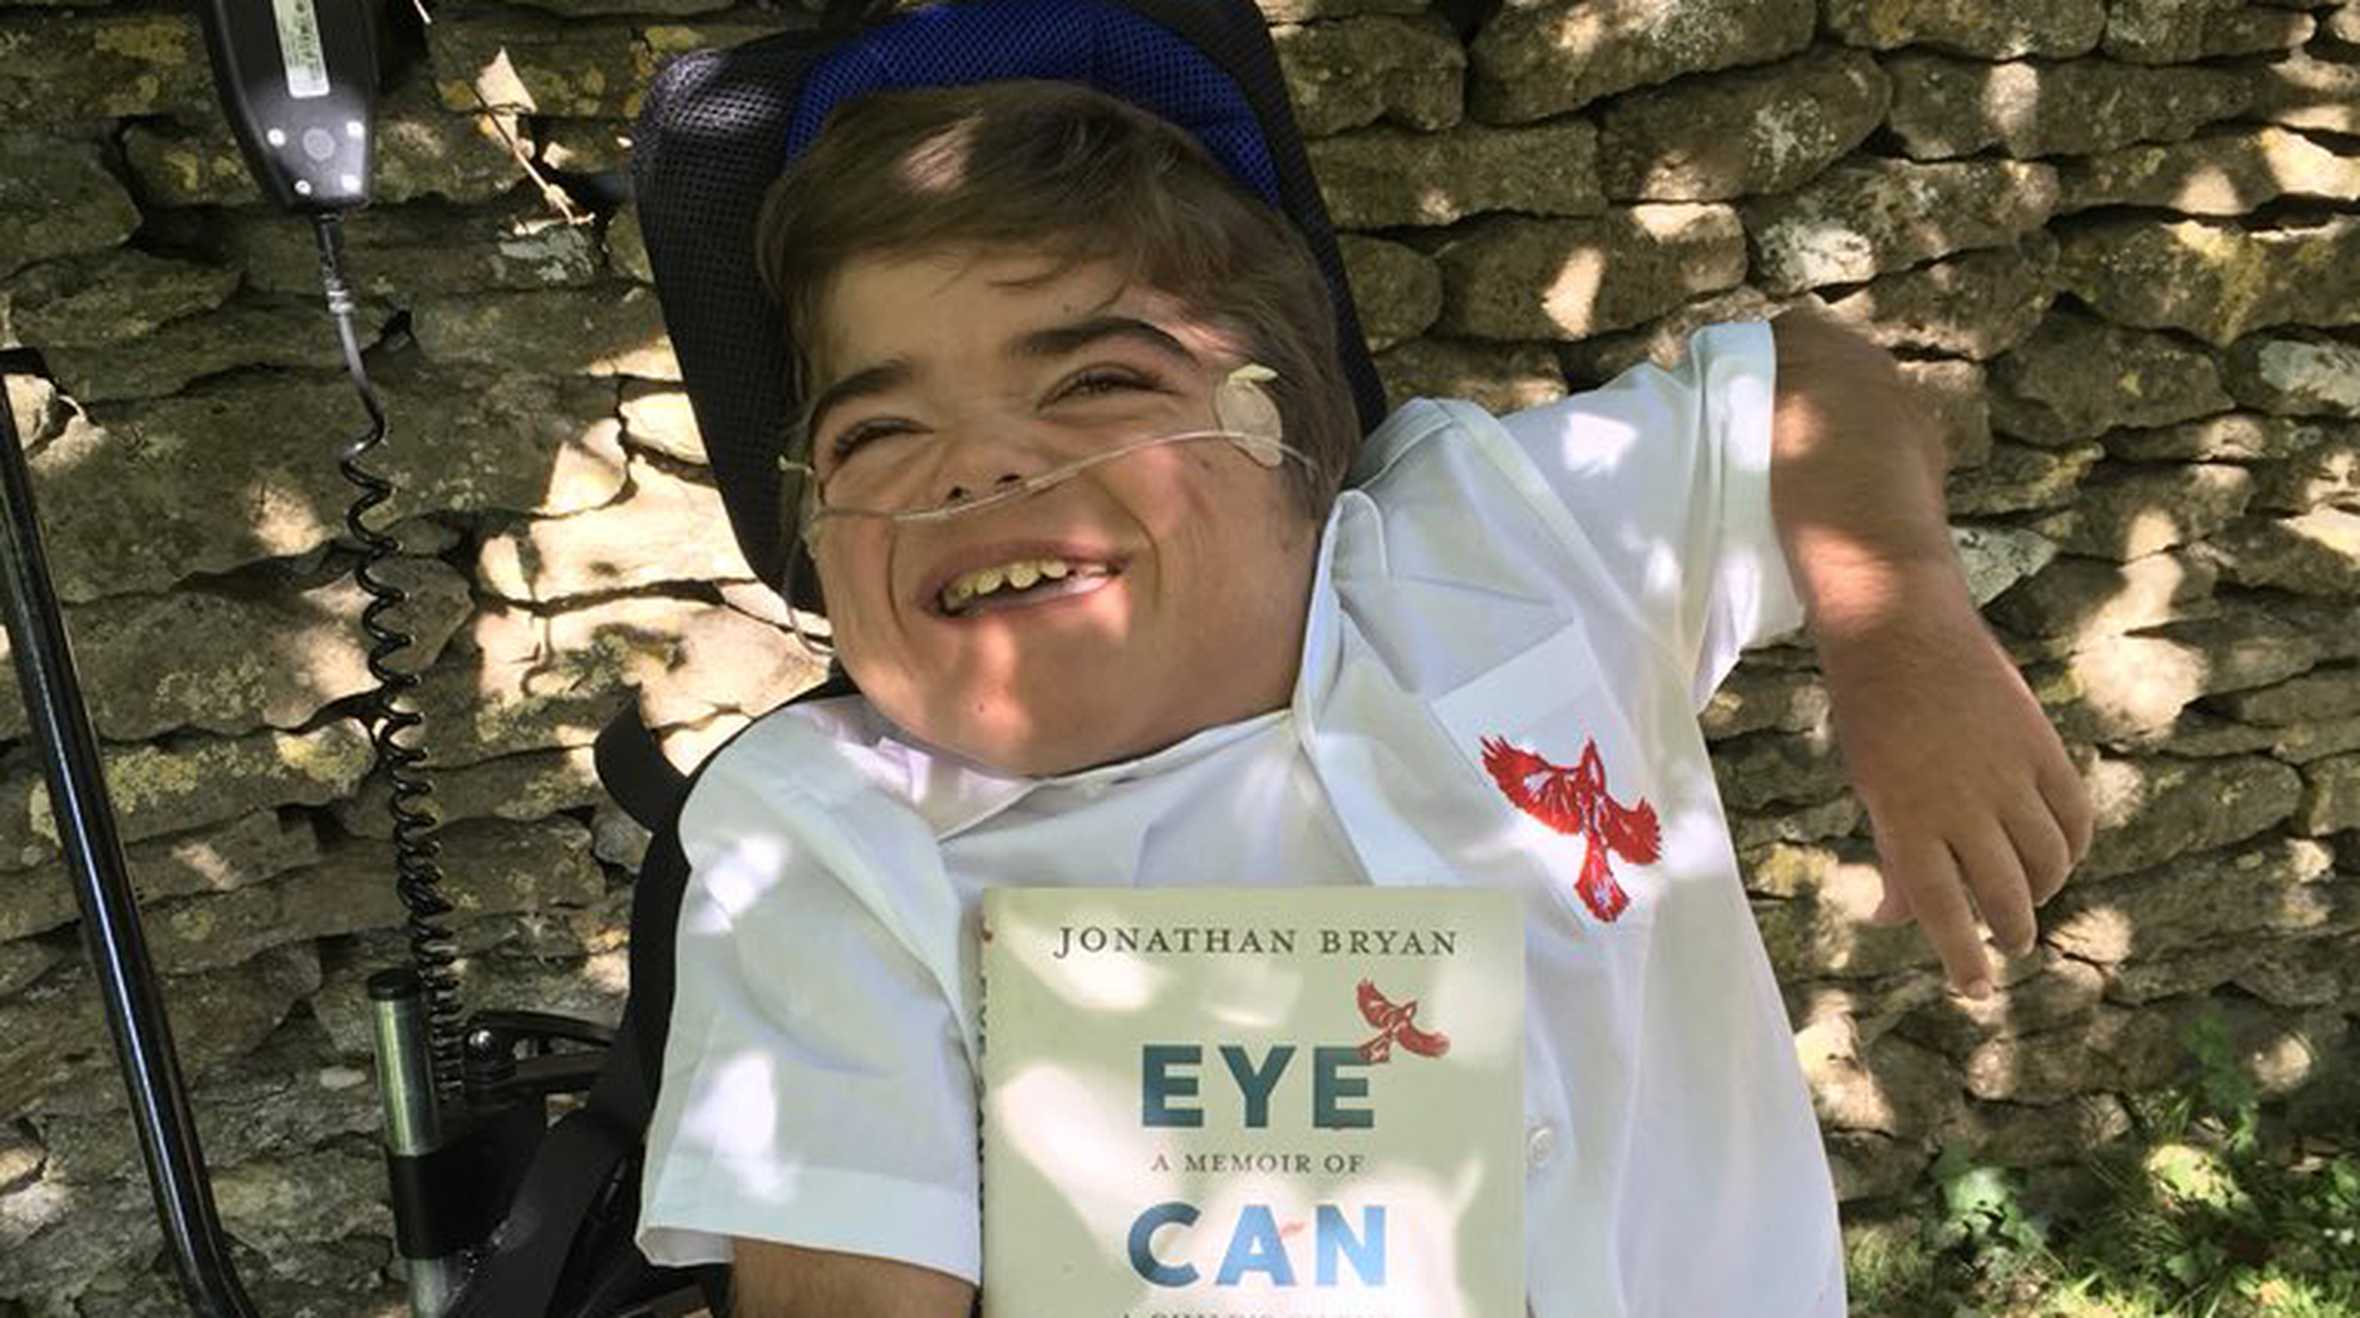 Jonathan with his book - Eye Can Write